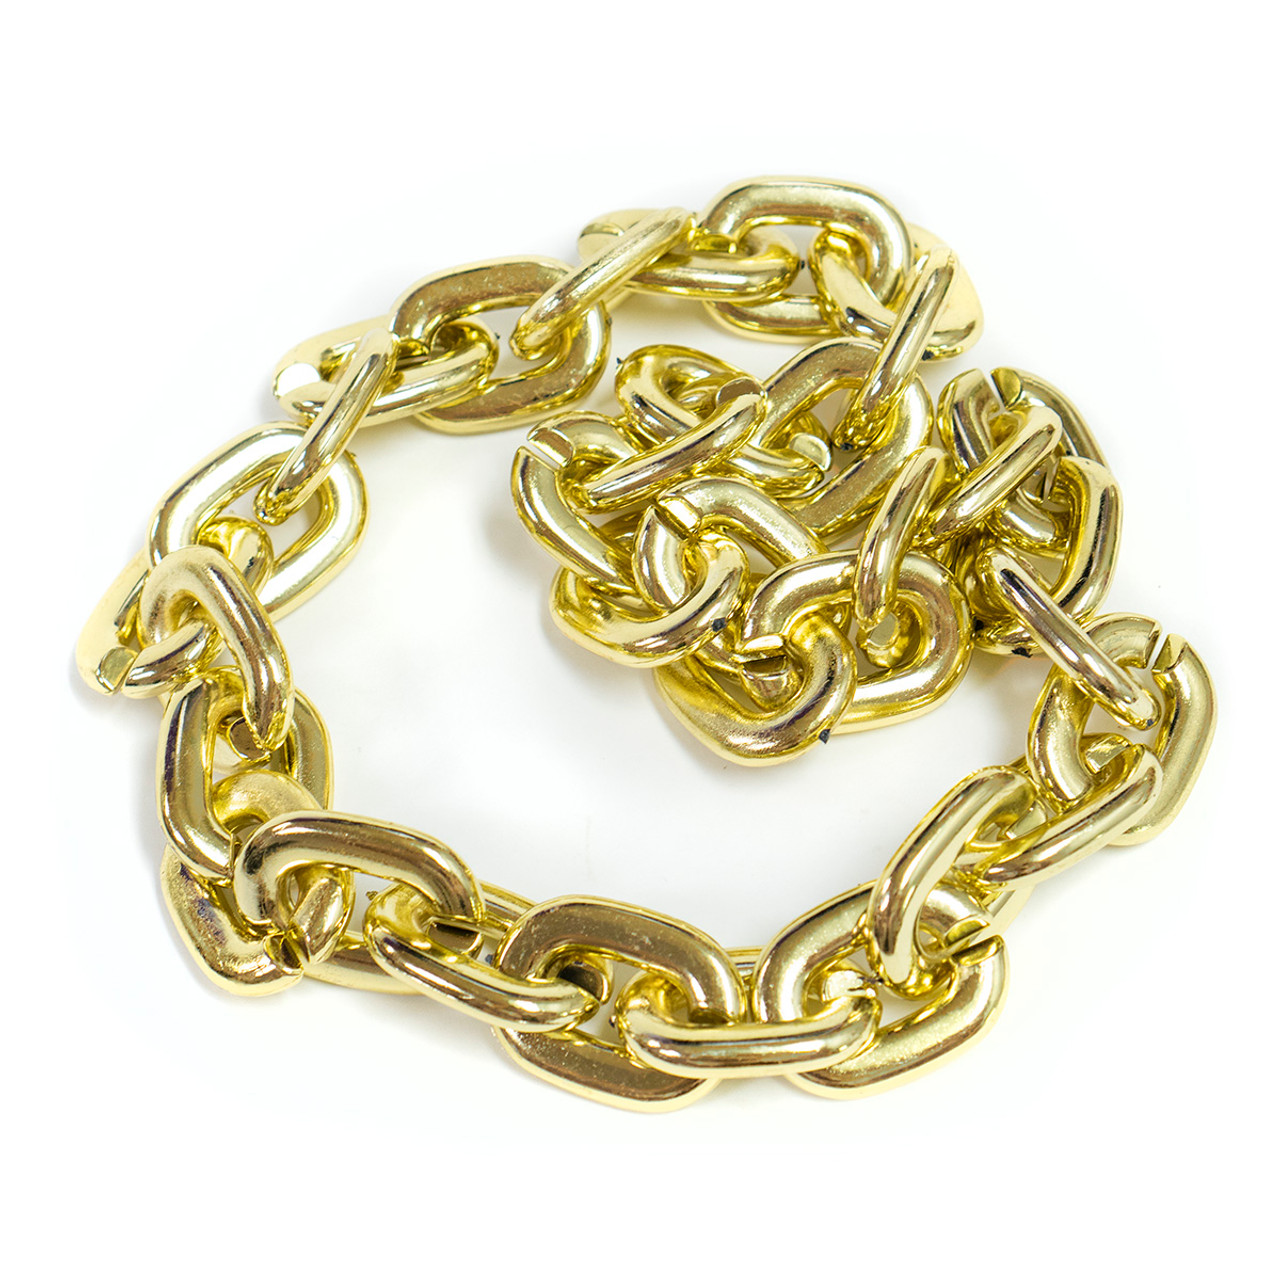 Big Rope Necklace Solid 14k Yellow Gold Chain Diamond Cut Twisted Style  Large Heavy, 8 mm - 24,26 inch - Walmart.com